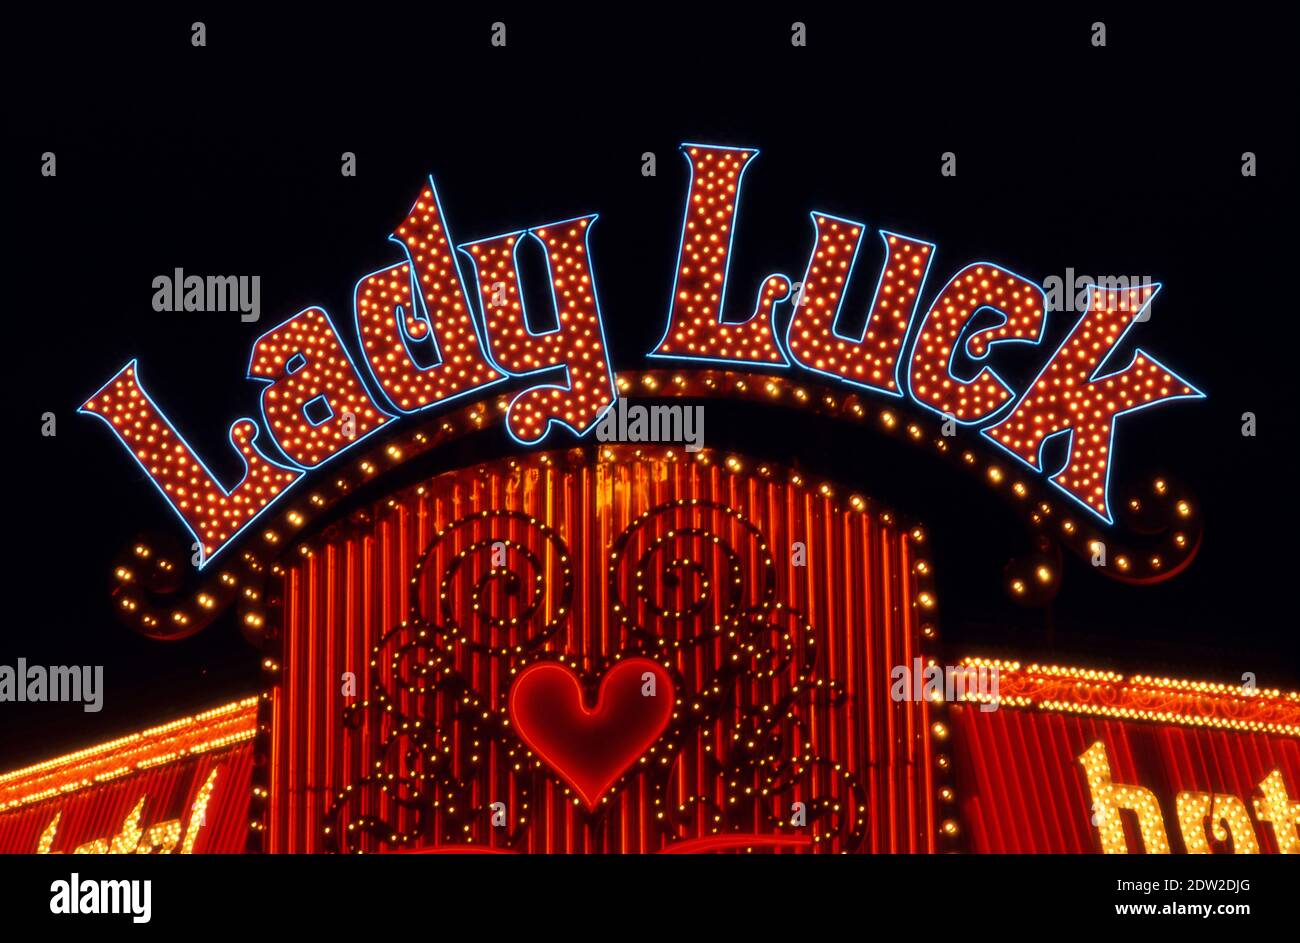 Lady Luck neon sign at casino in Las Vegas, Nevada Stock Photo - Alamy